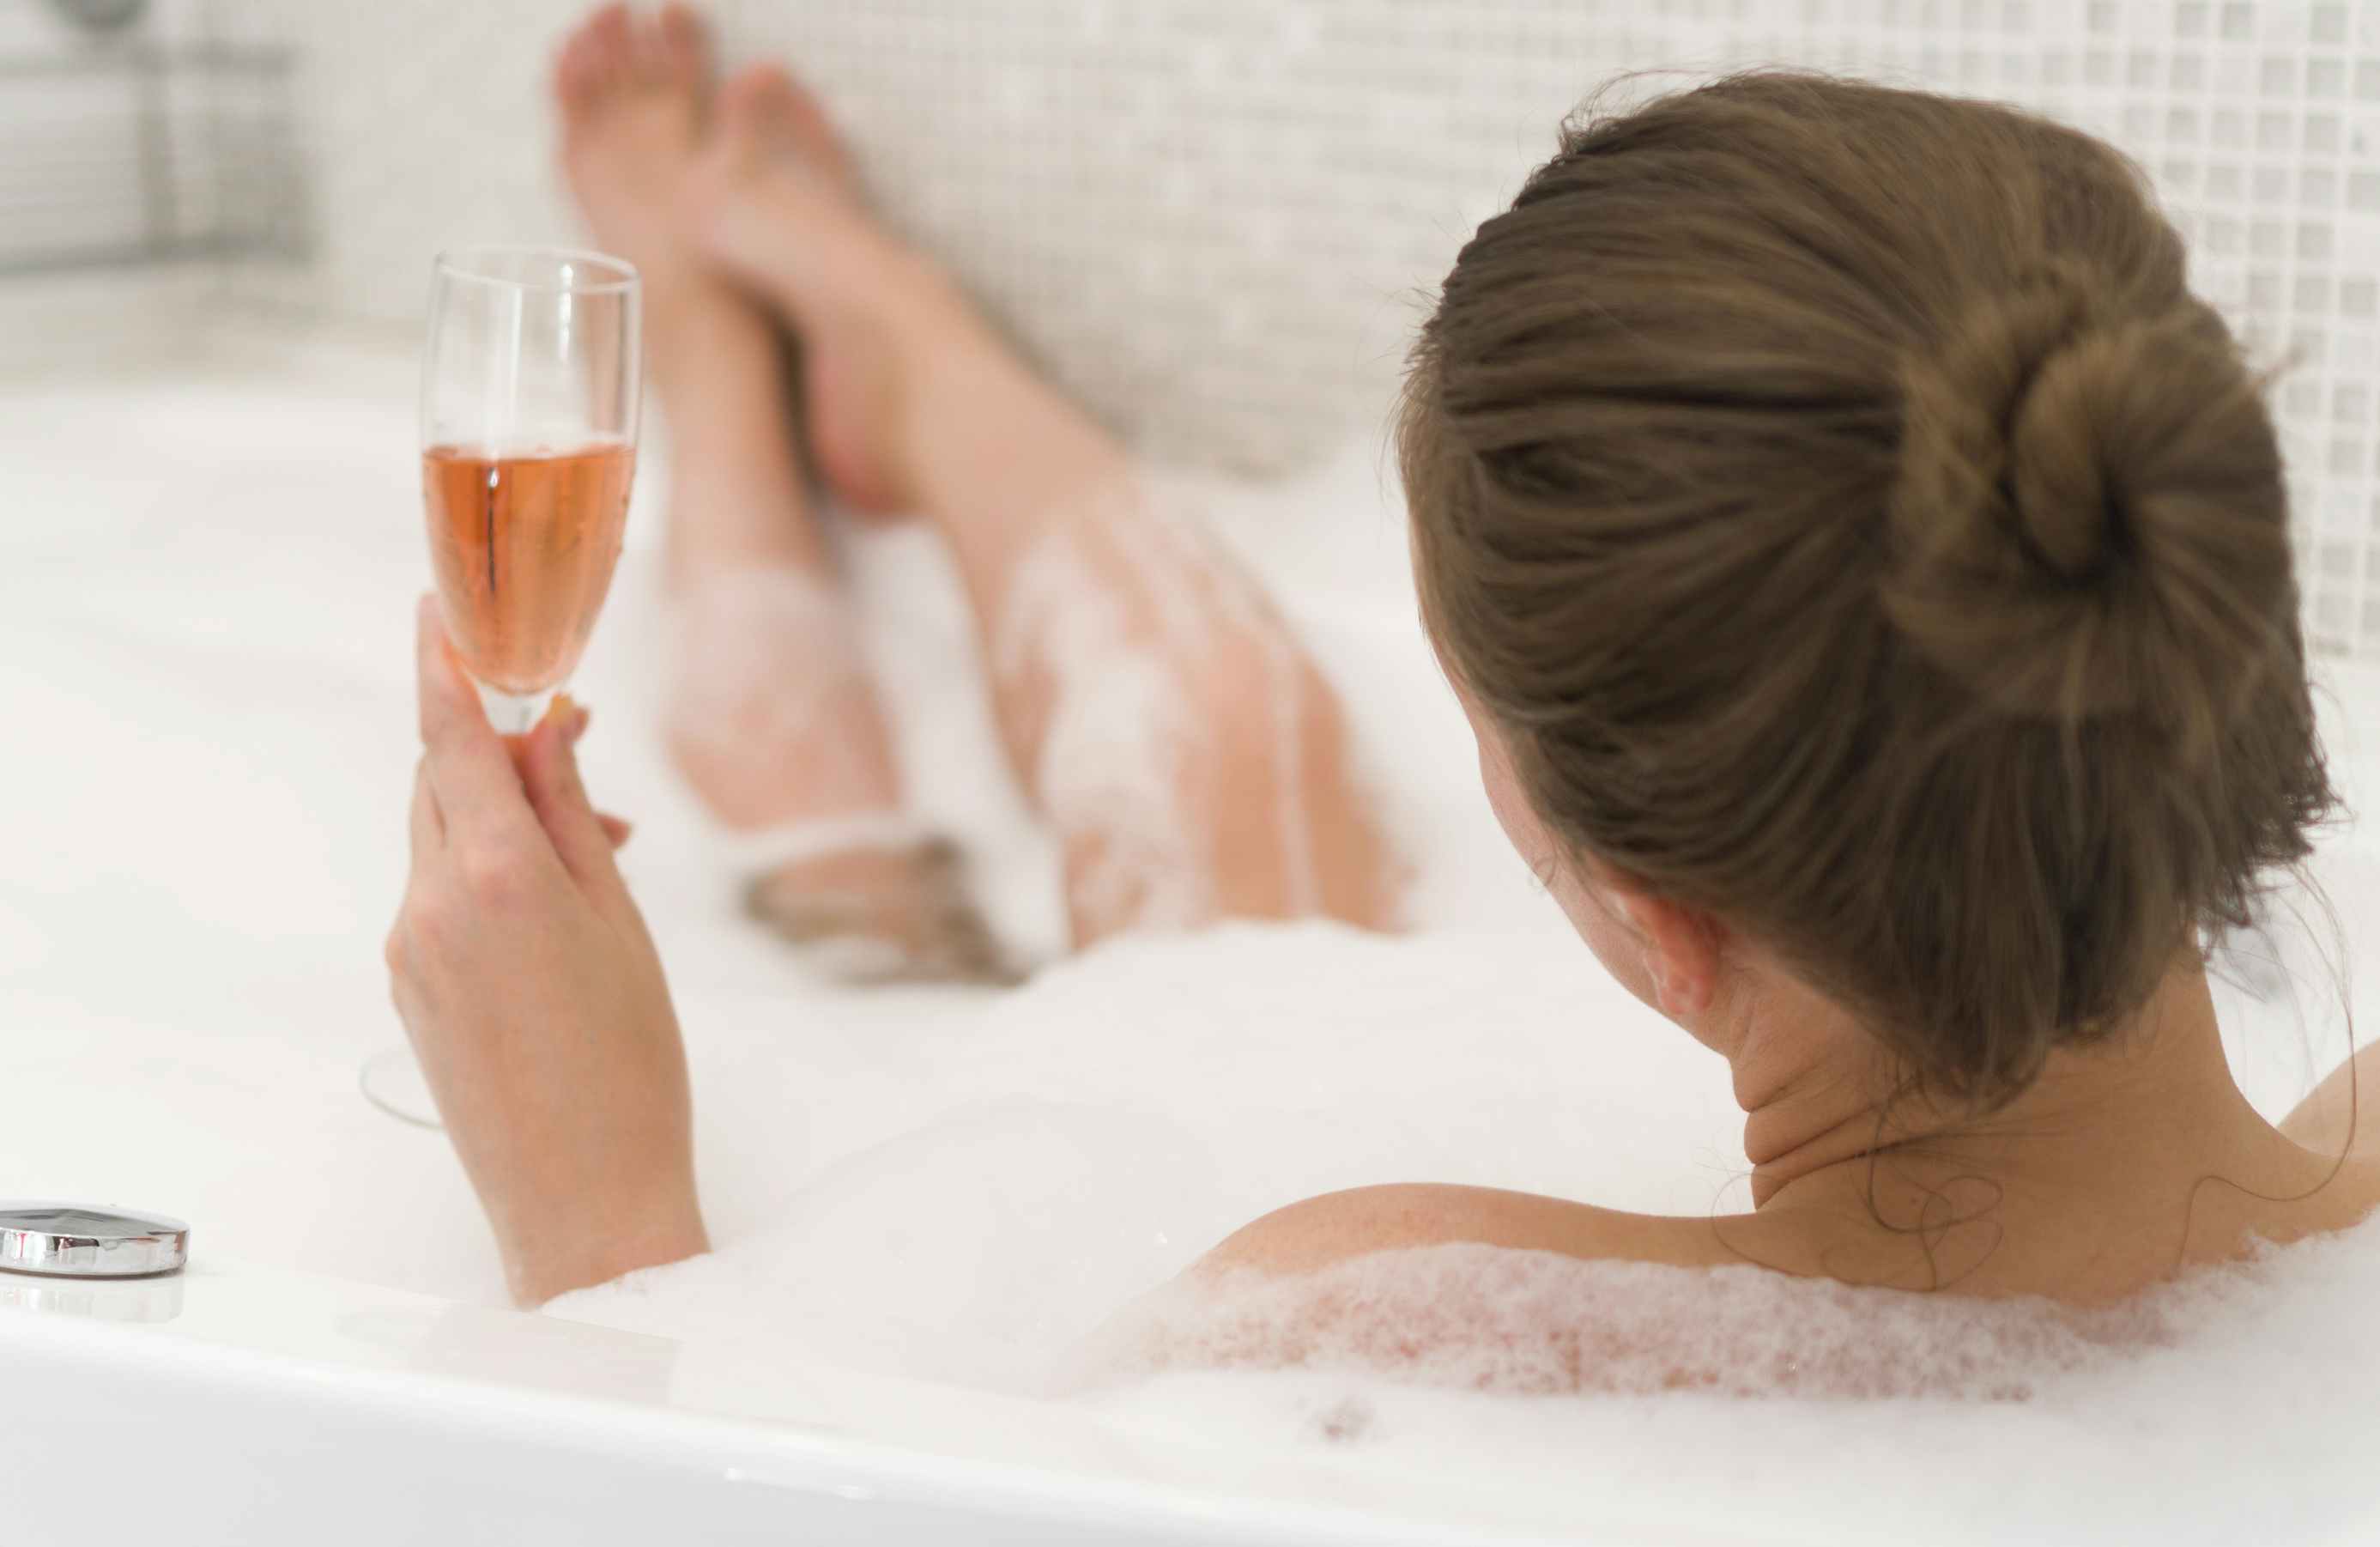 A person in a bubble bath holding a glass of champagne